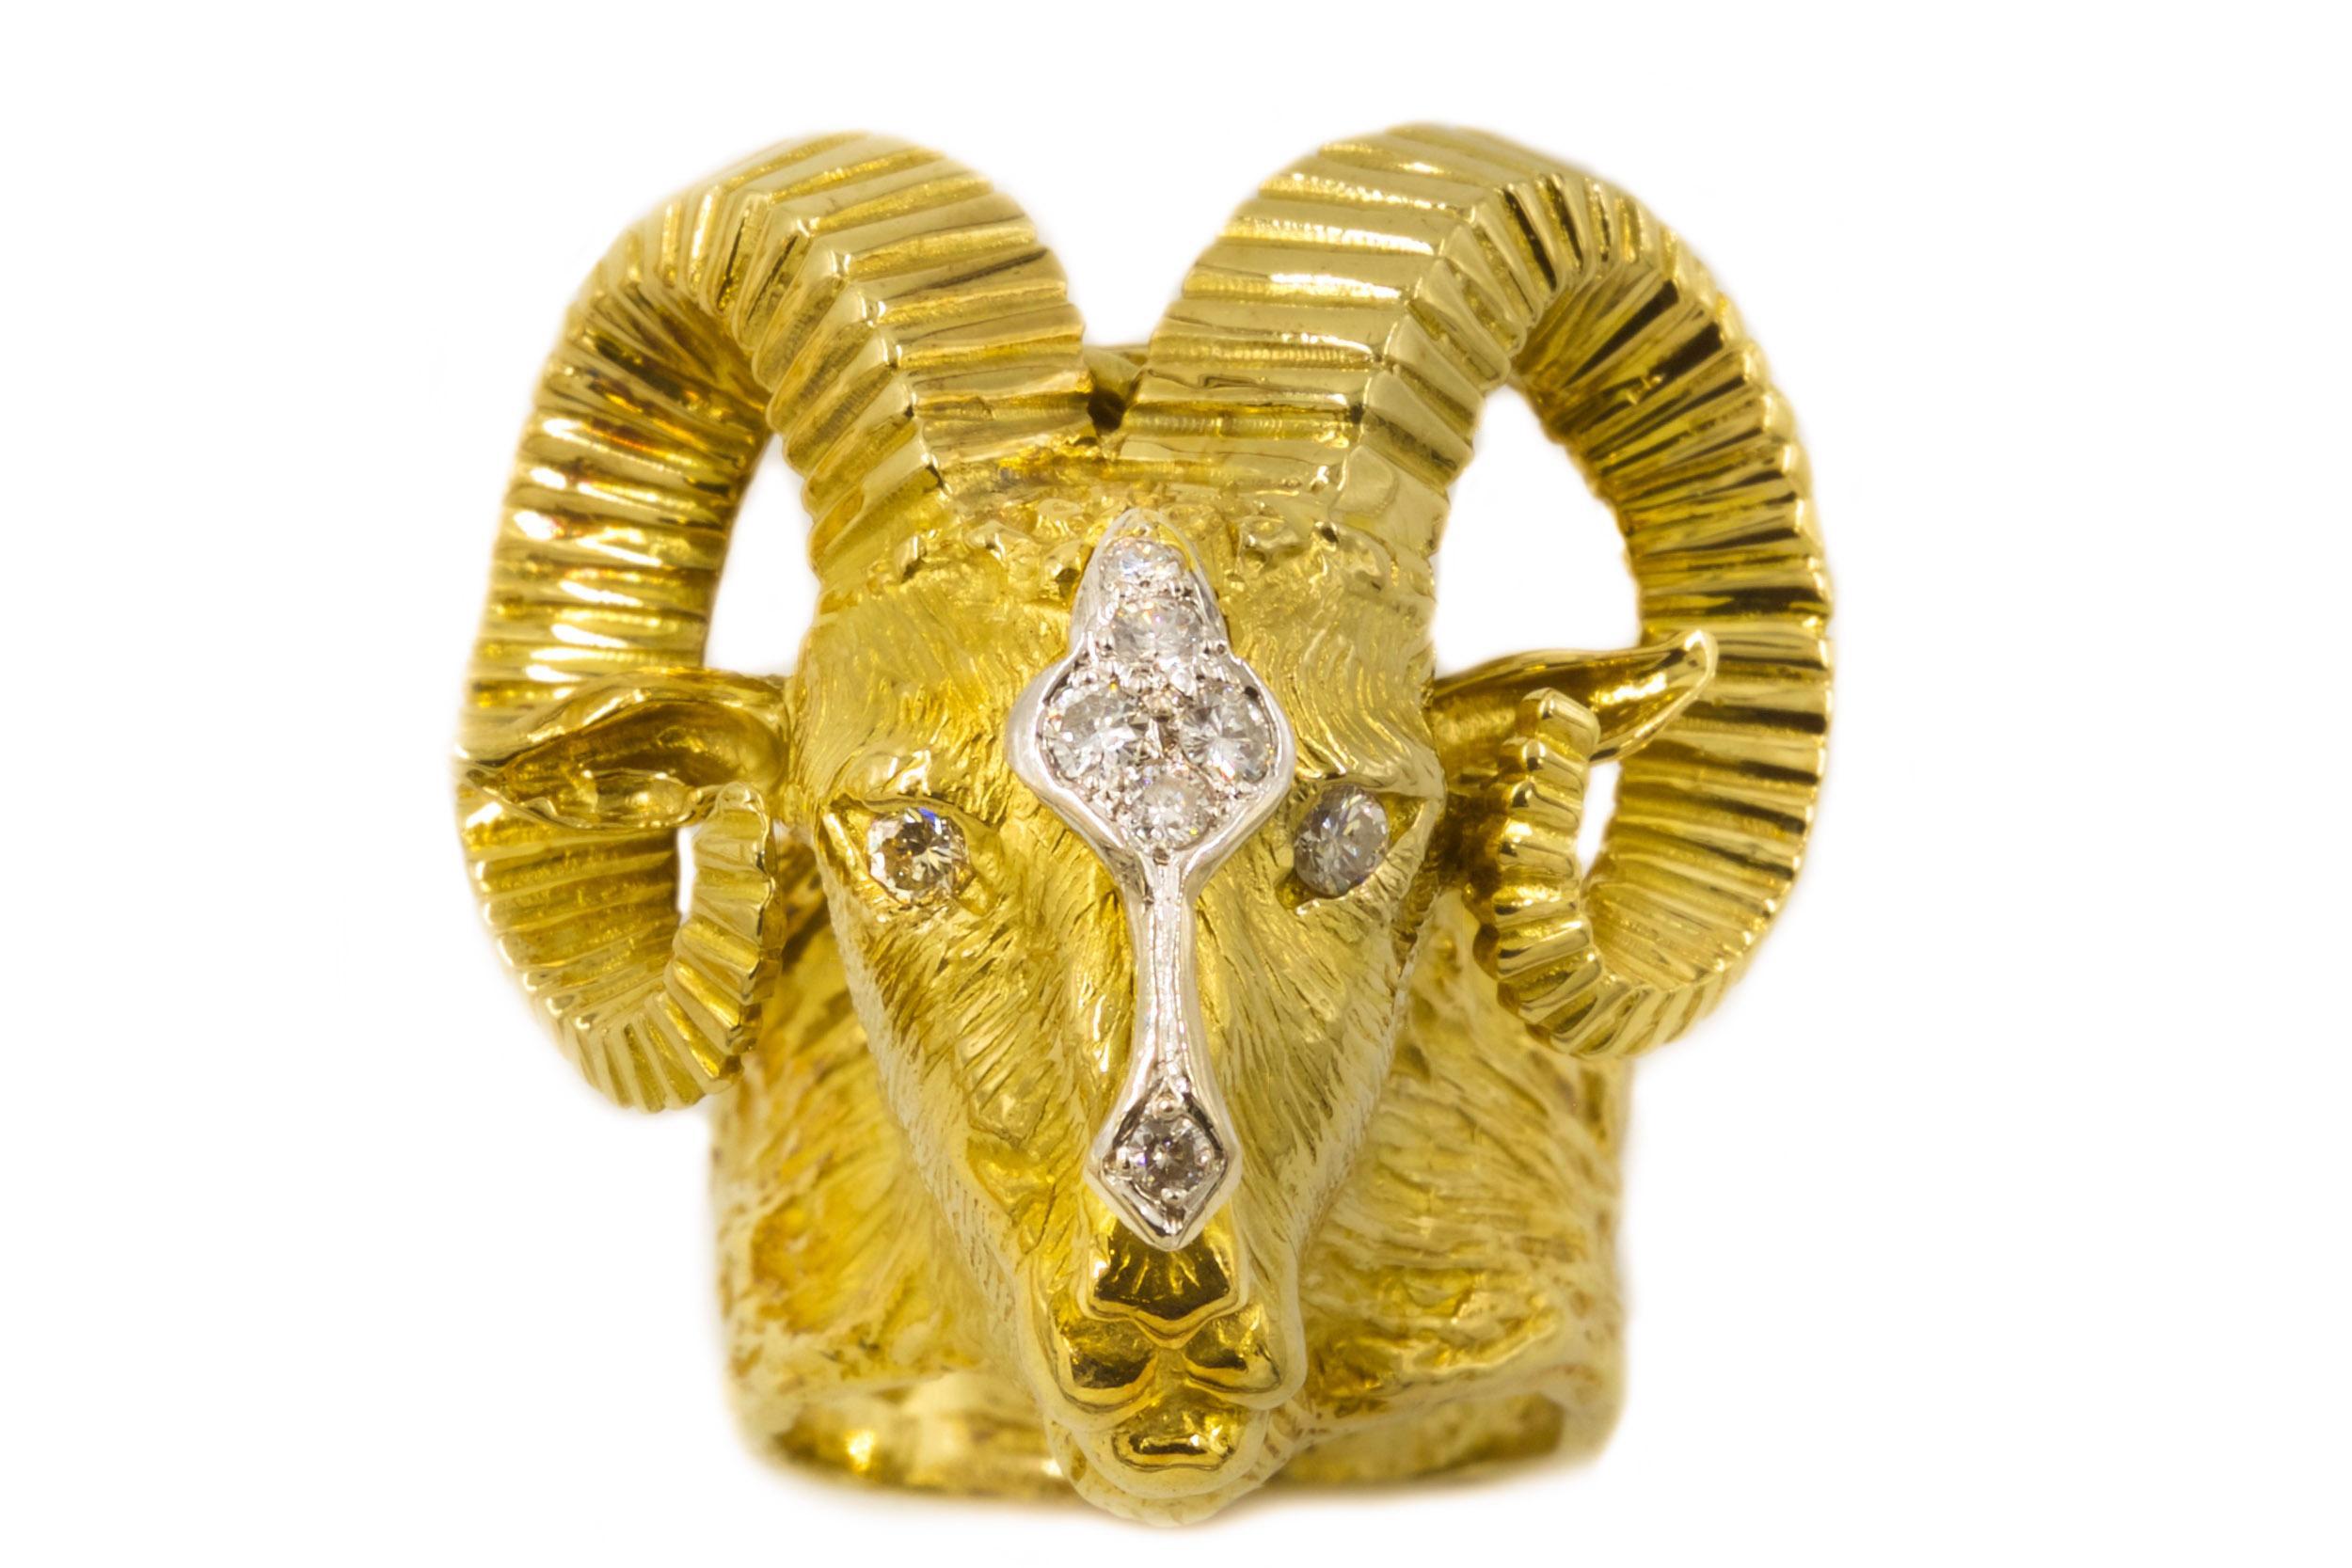 20th Century 14k Gold Ram's Head Necklace, Bracelet and Ring by La Triomphe, 250.7 grams